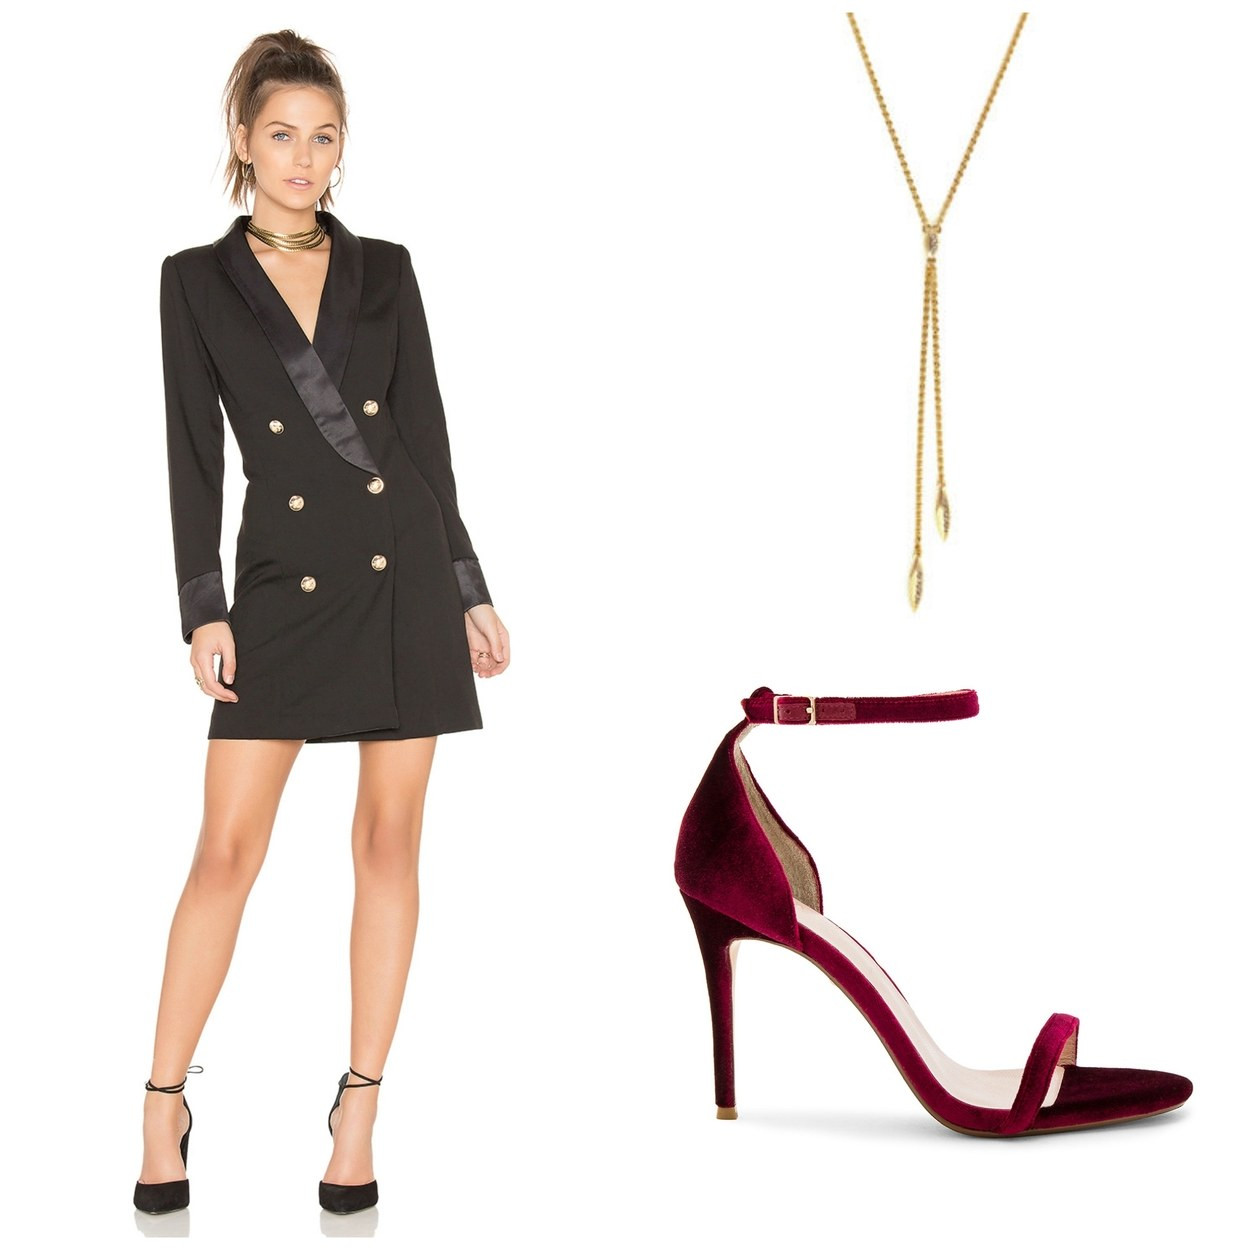 Office Christmas Party Outfit Ideas
 What Wear to an fice Holiday Party 10 Holiday Party